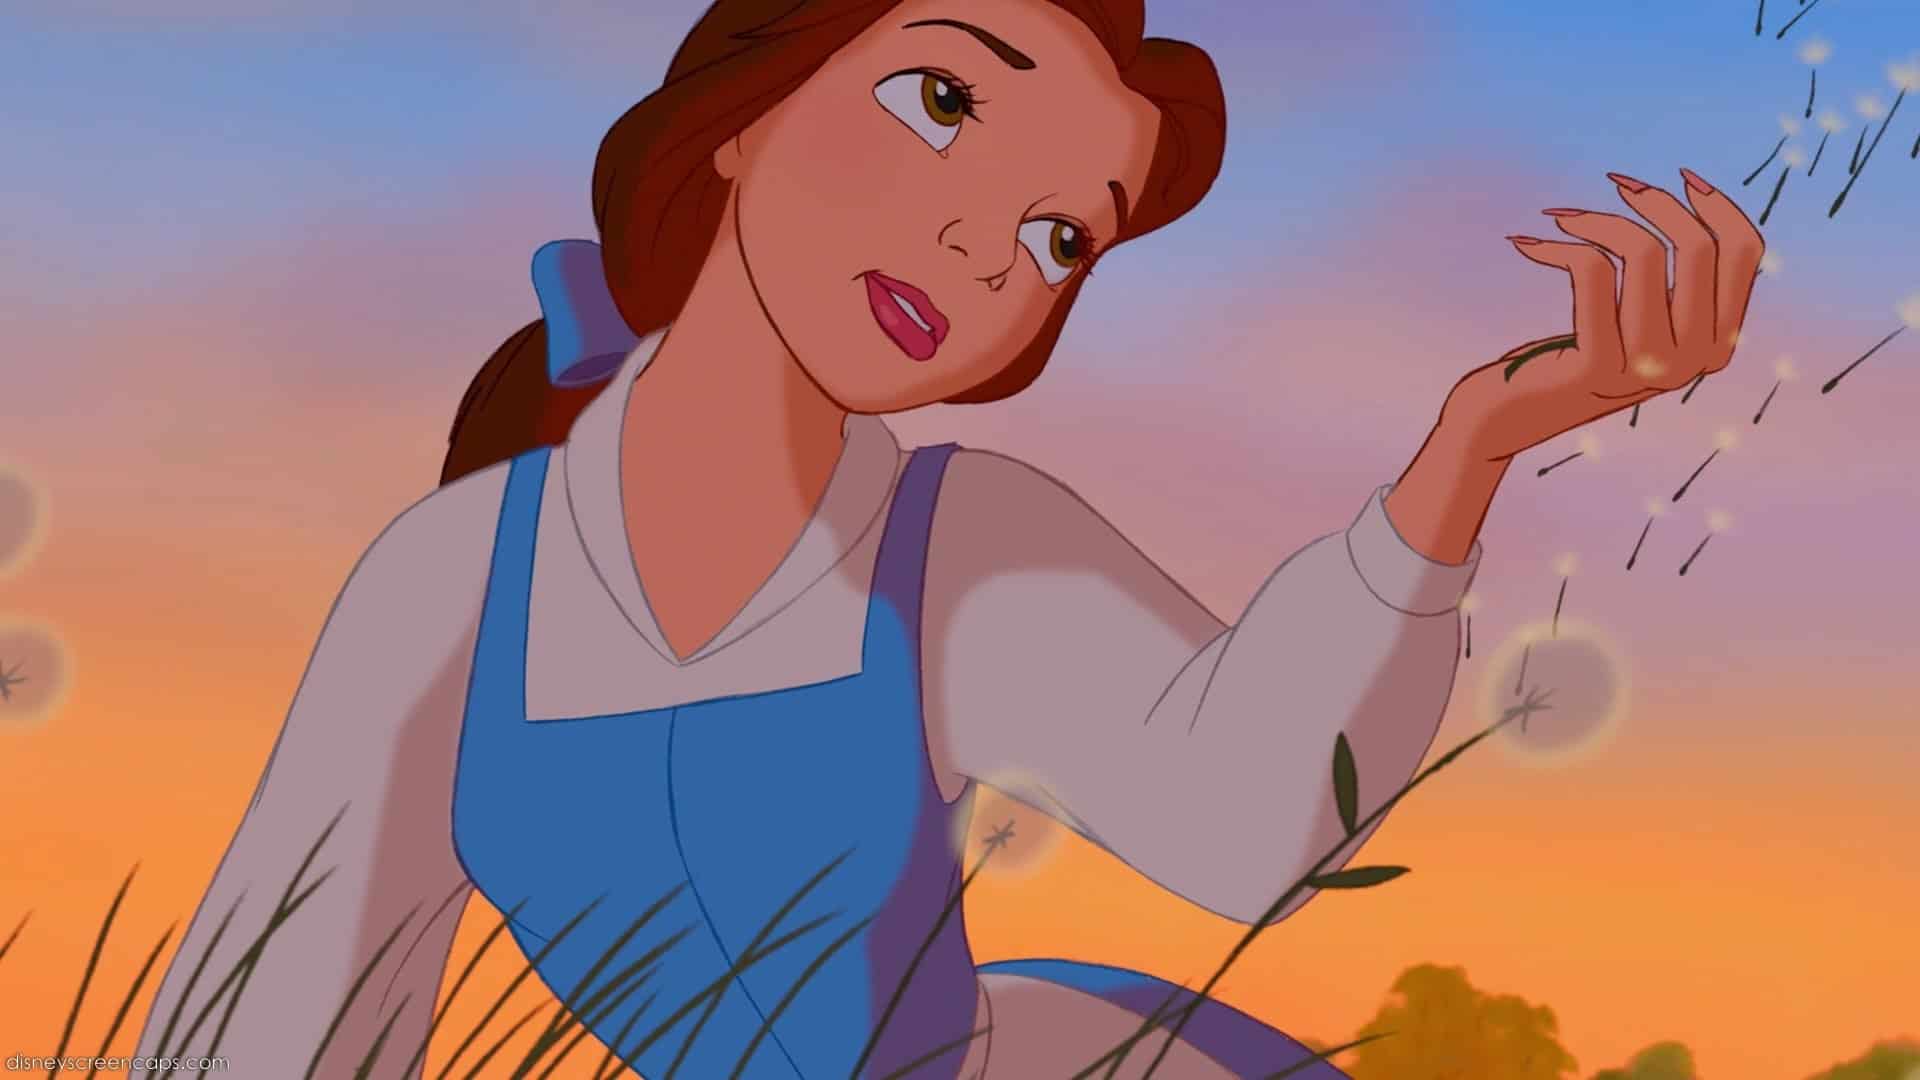 Belle's Interested in Idle Independence - worst Disney princess